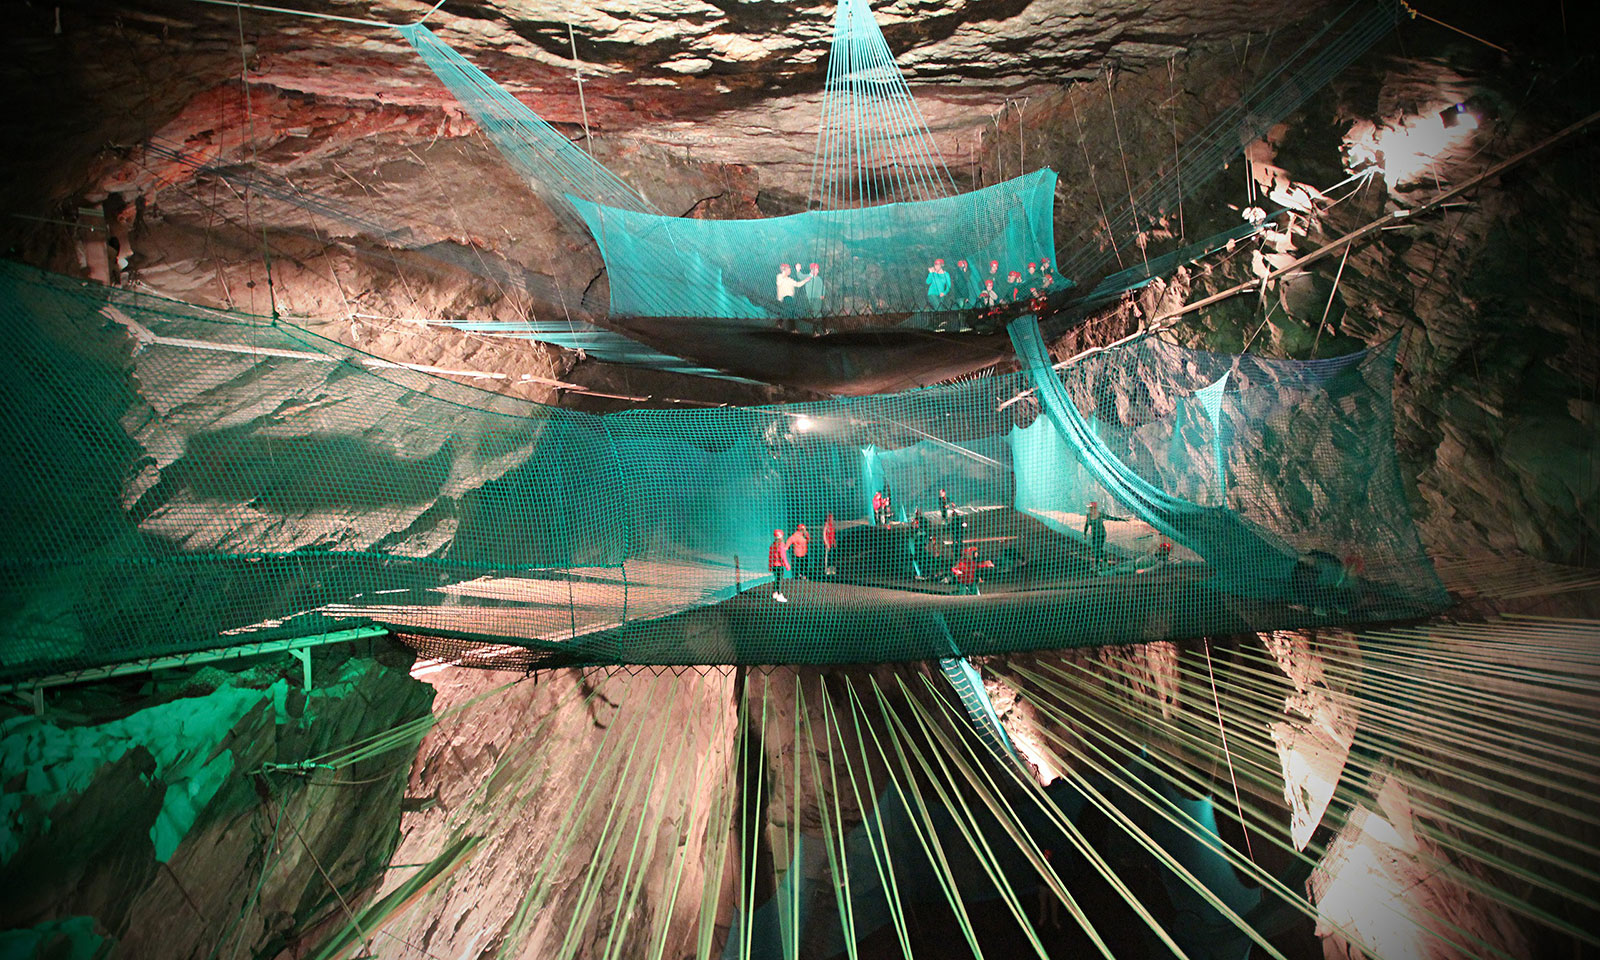 World's largest underground trampoline in an enormous cavern at a Welsh slate mine.